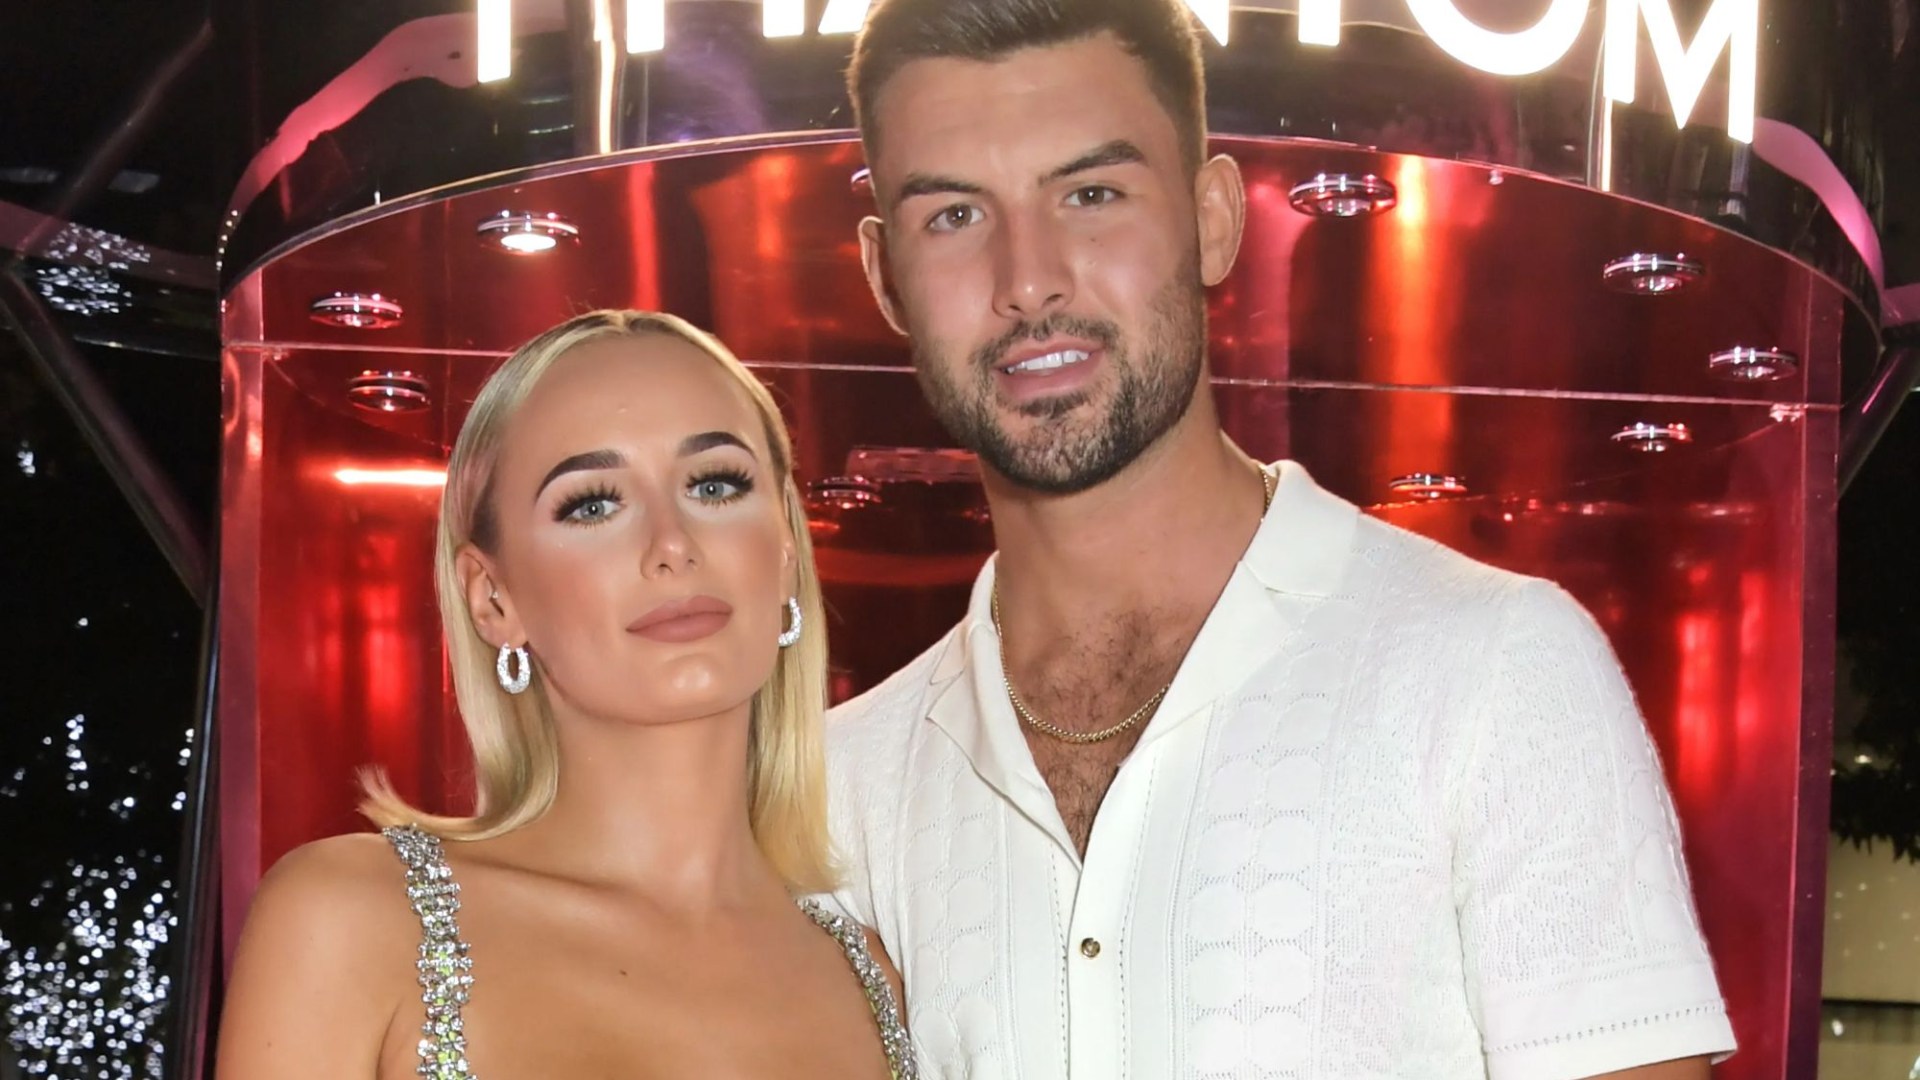 Millie Court of Love Island enjoys romantic break at a hotel with Liam Reardon, the love of her life to celebrate Liam Reardon’s birthday